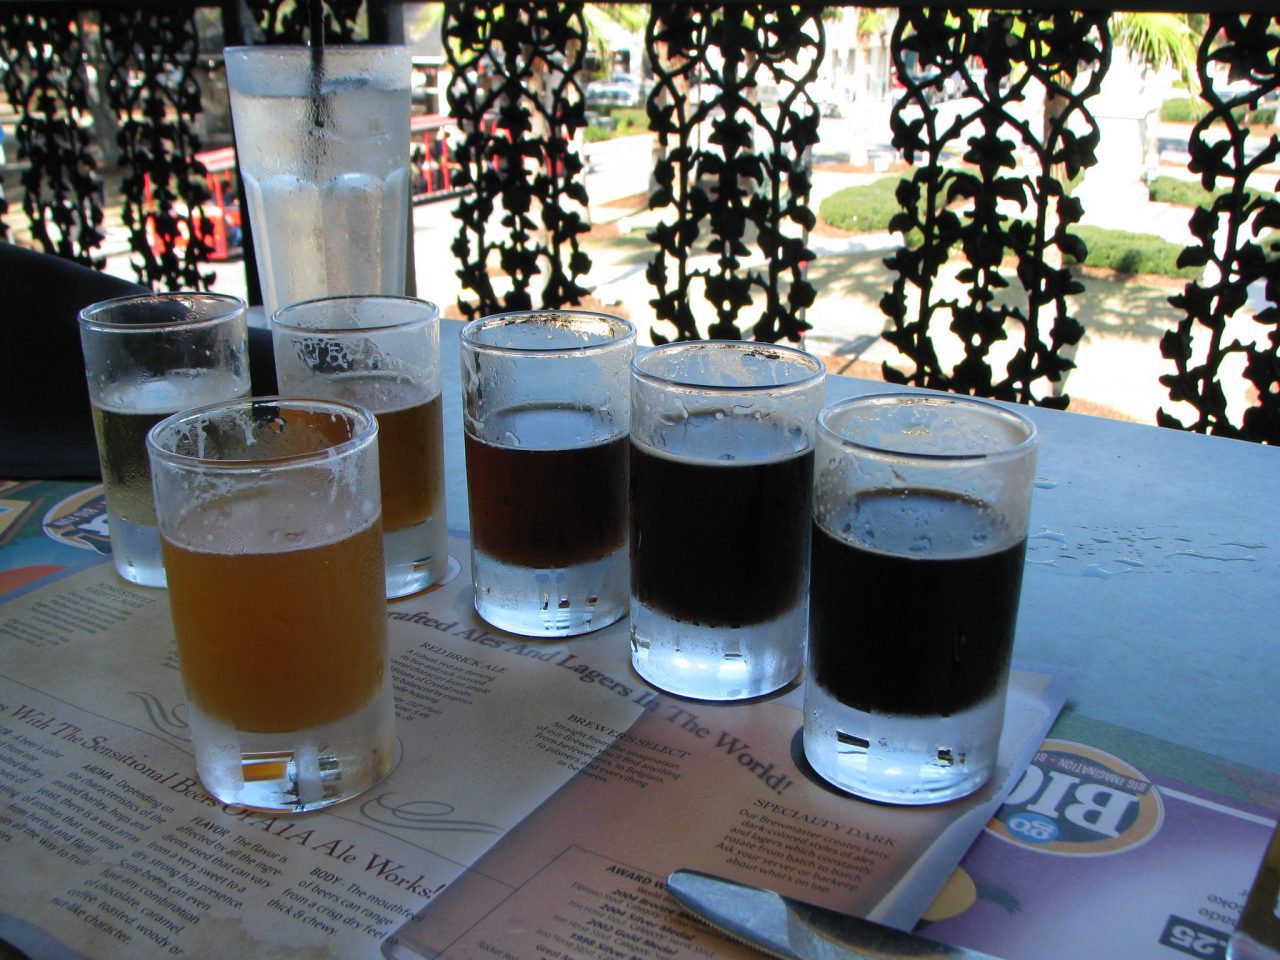 A1A Ale Works in St. Augustine, Florida via Flickr